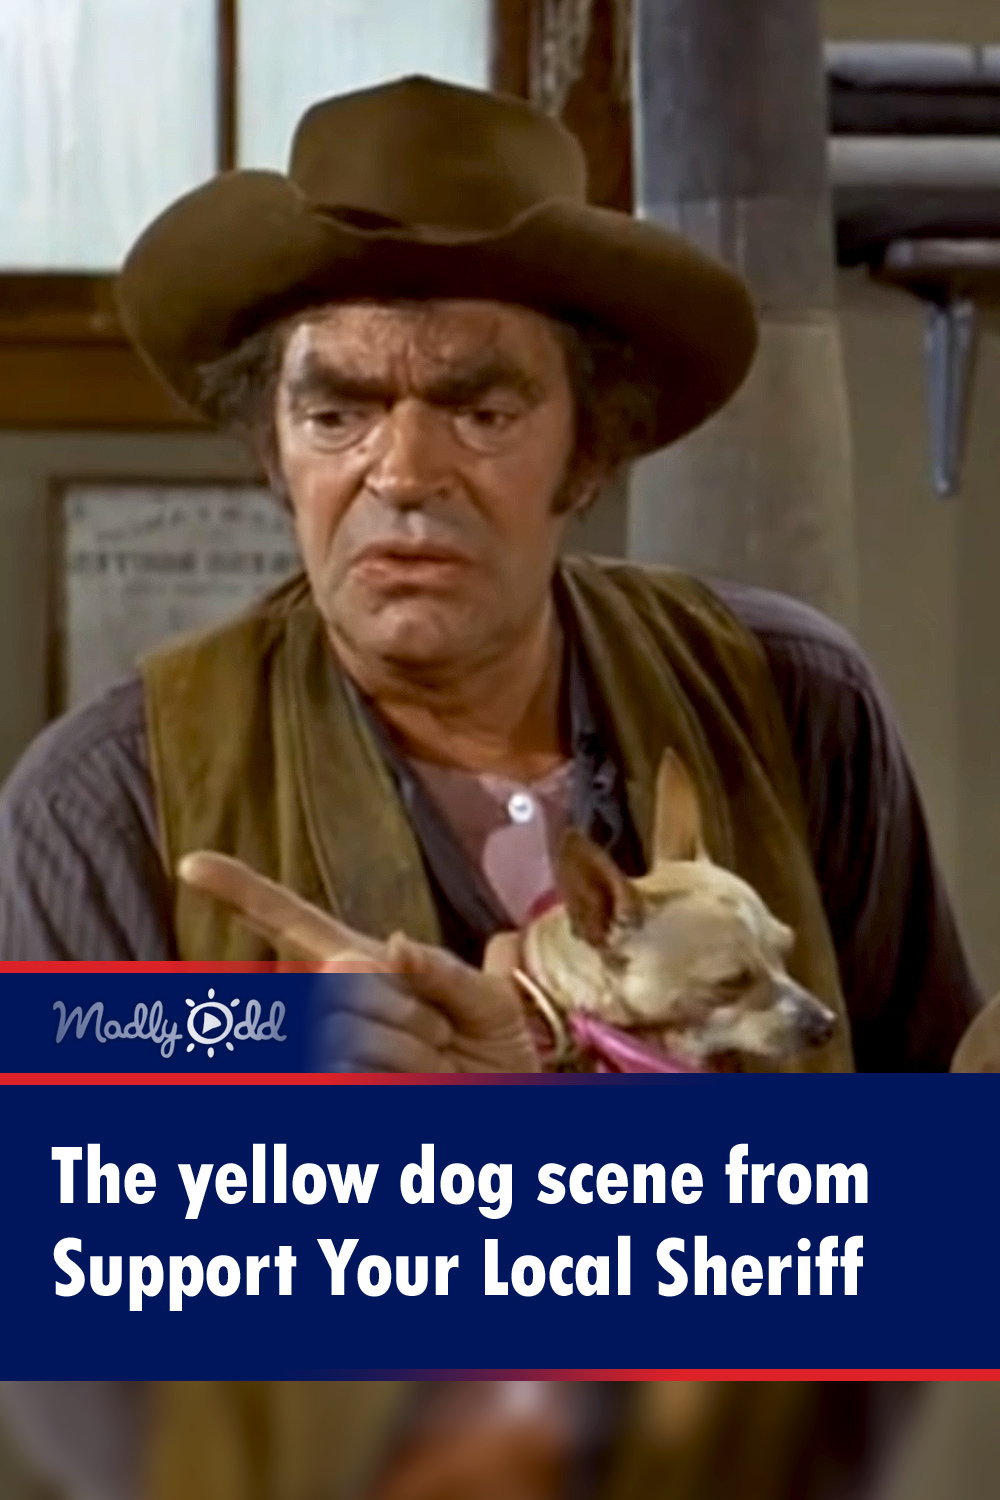 The yellow dog scene from Support Your Local Gunfighter